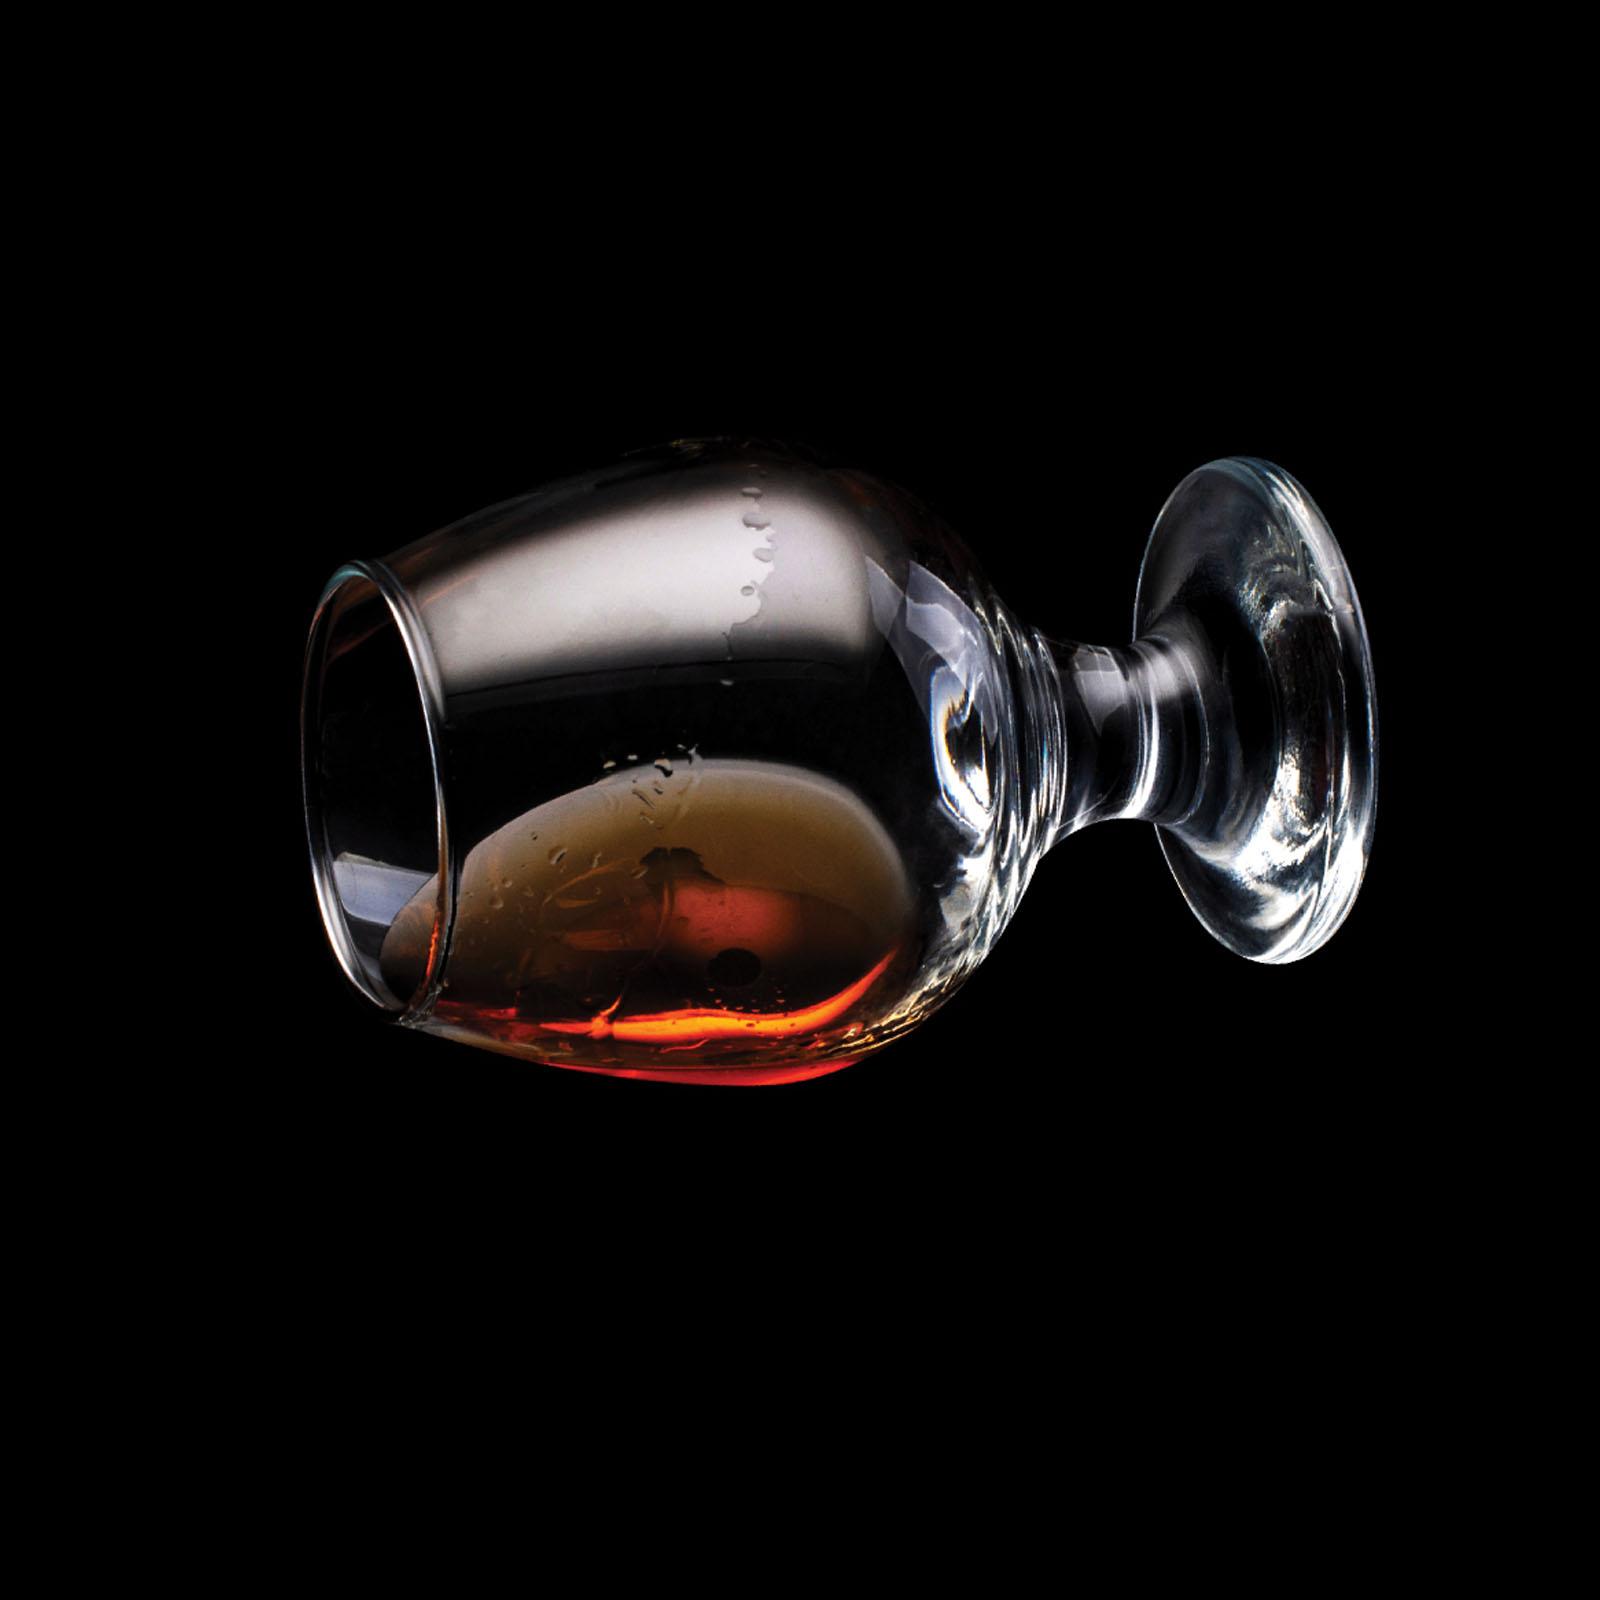 A glass of brandy on its side against a black background